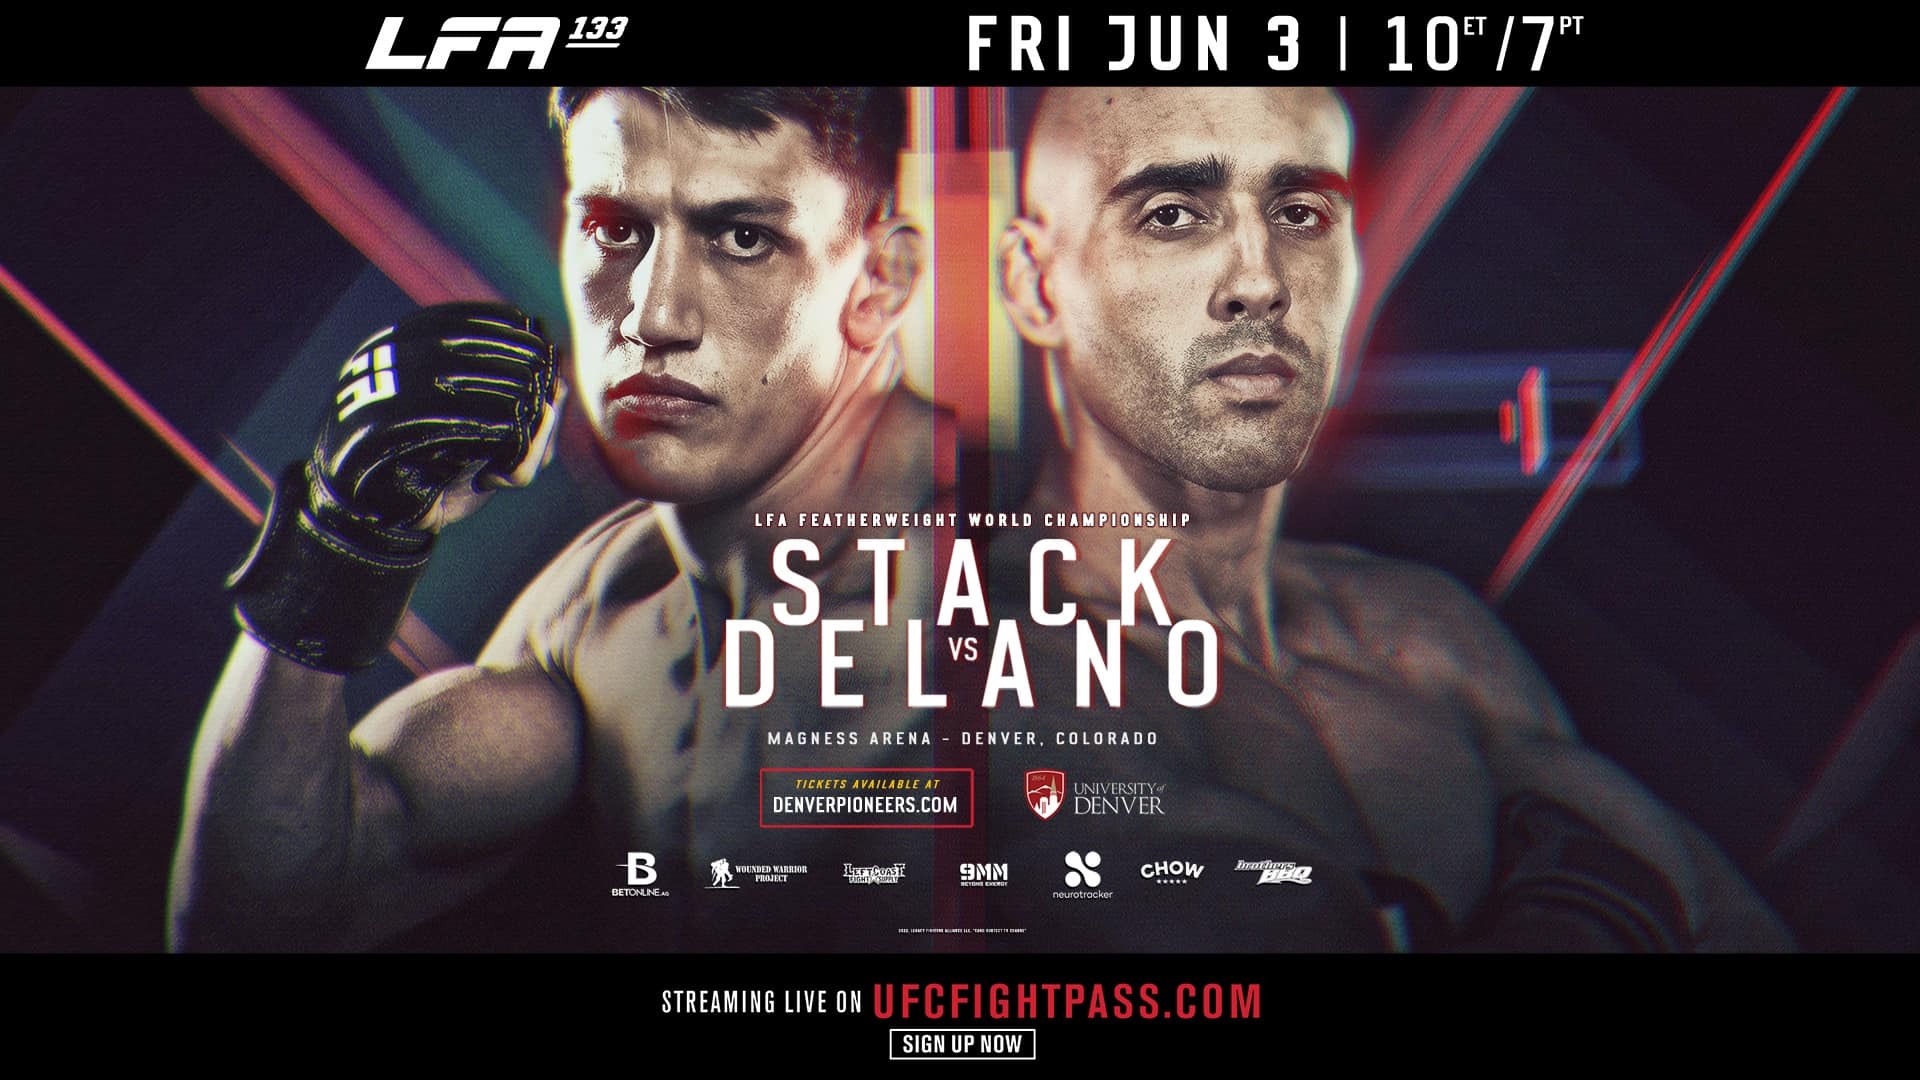 LFA brings the Featherweight Championship to Denver at LFA 133 Legacy Fighting Alliance News